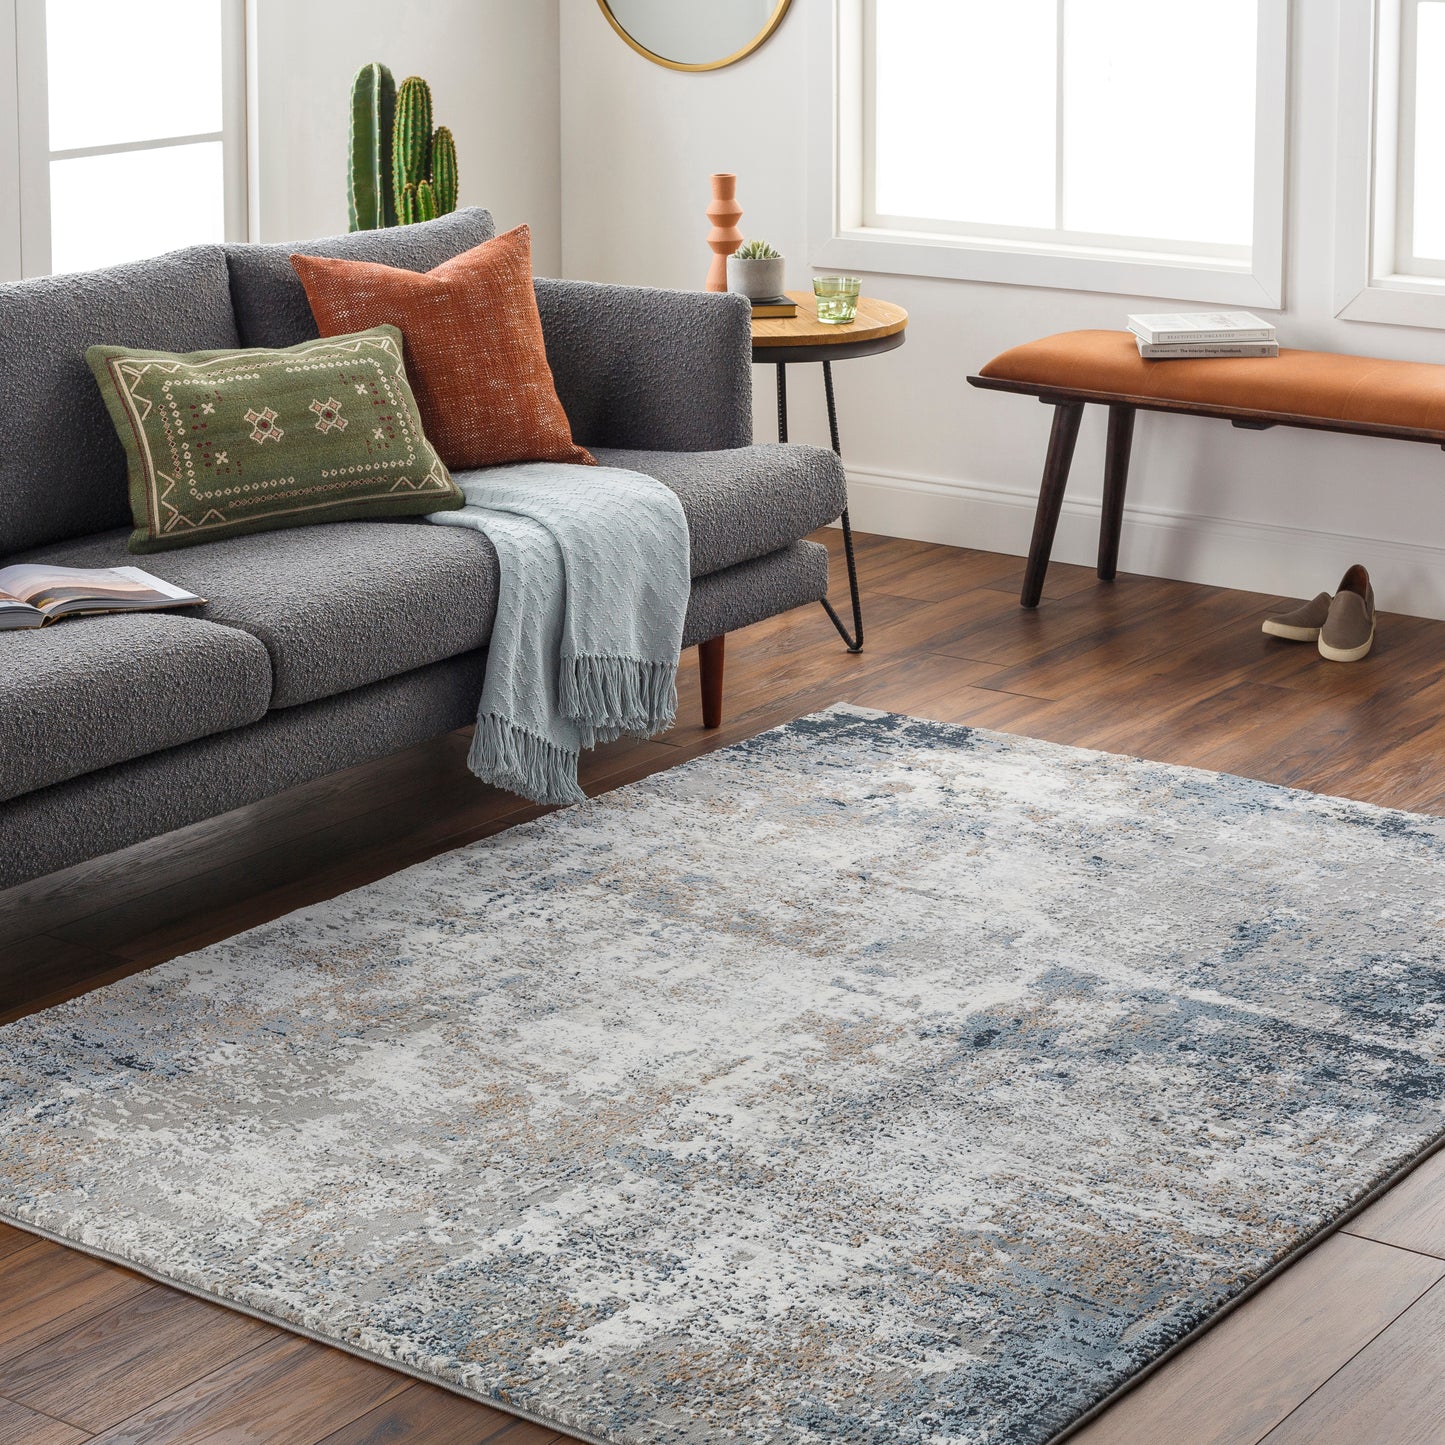 Allegro plus 31123 Machine Woven Synthetic Blend Indoor Area Rug by Surya Rugs